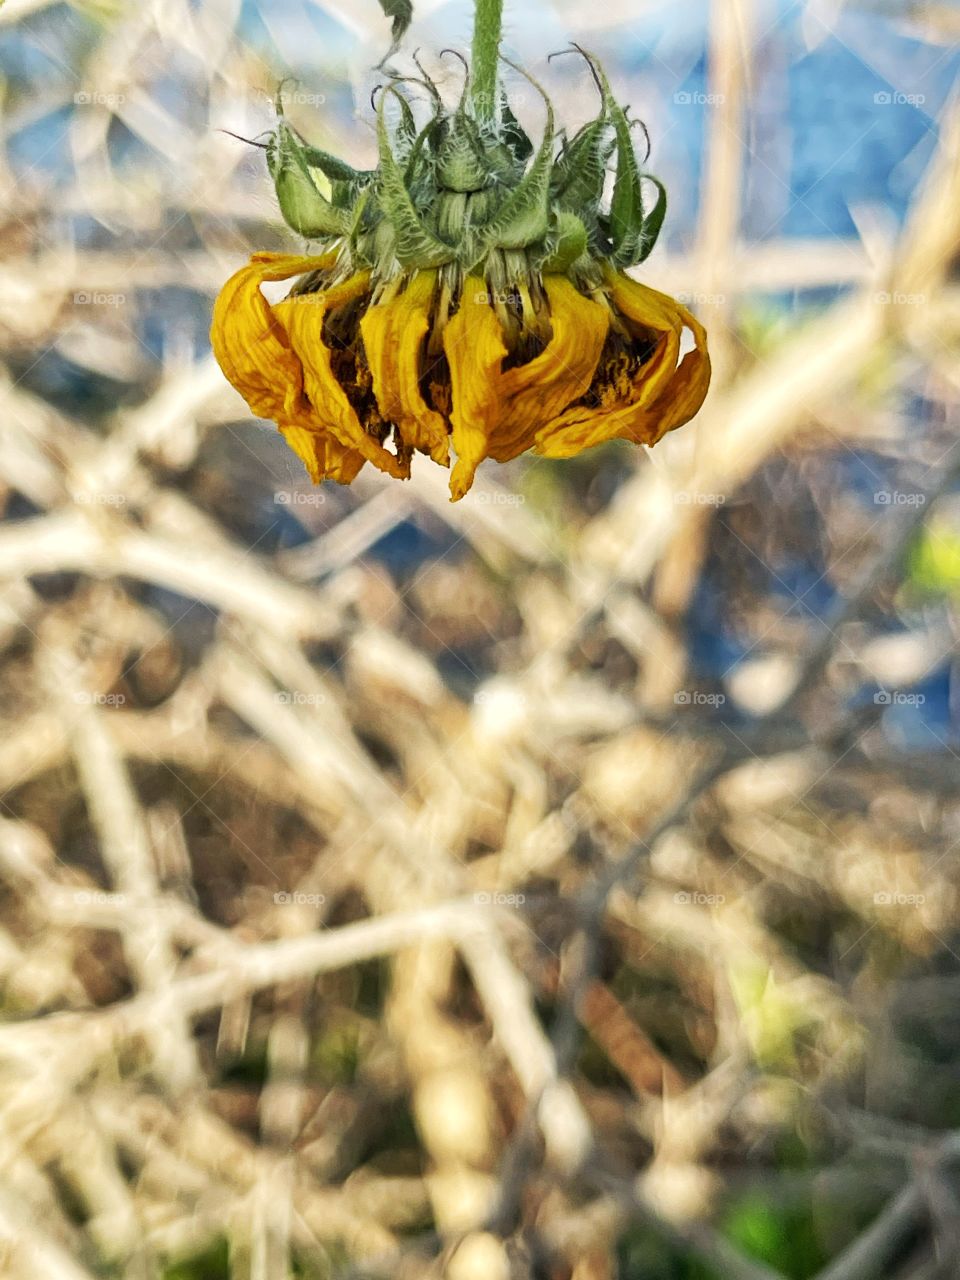 Wilted sunflower with dried shrubs in background 